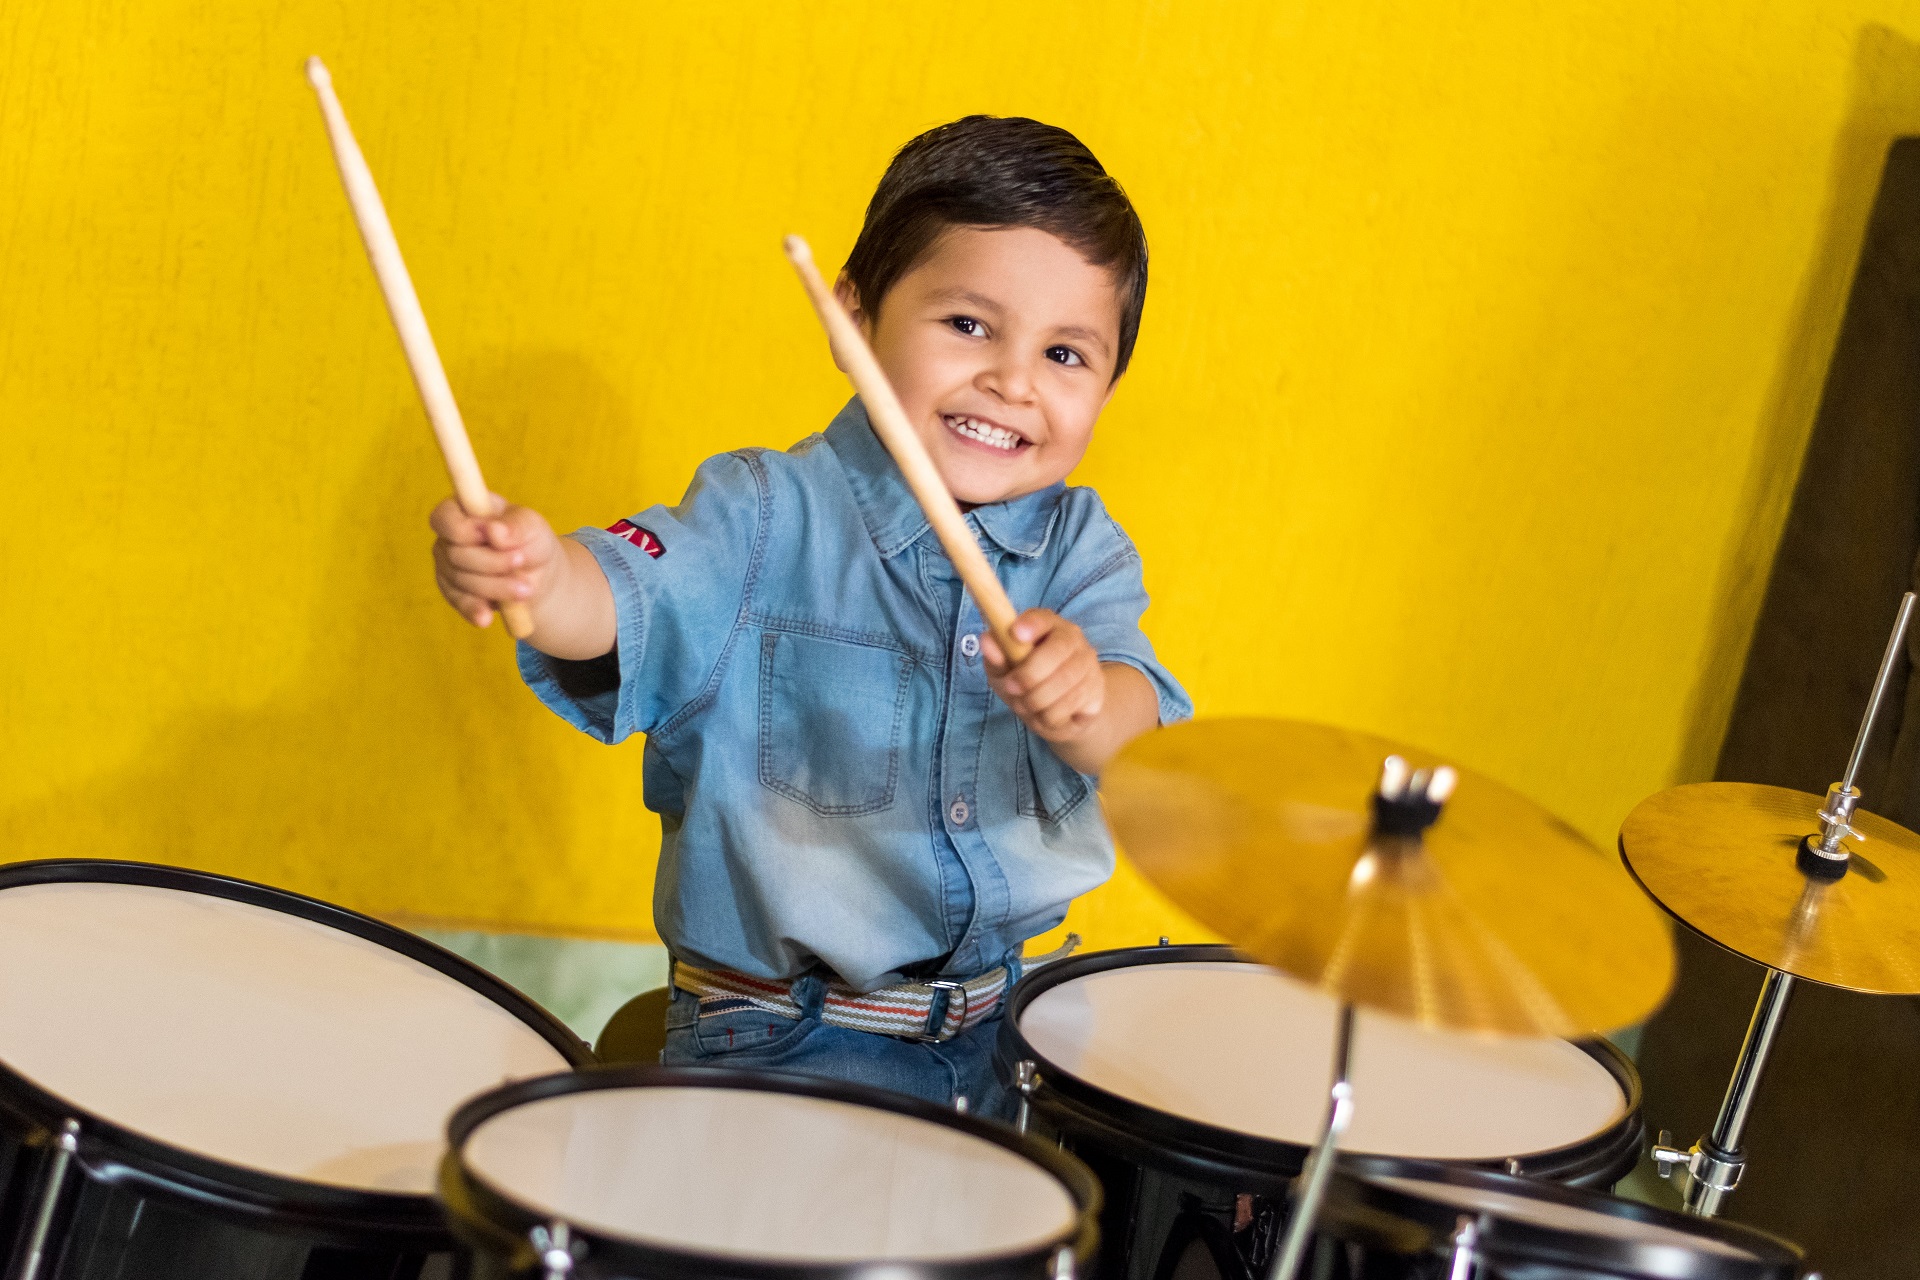 Drumming boy in a soundproofed home using insulation